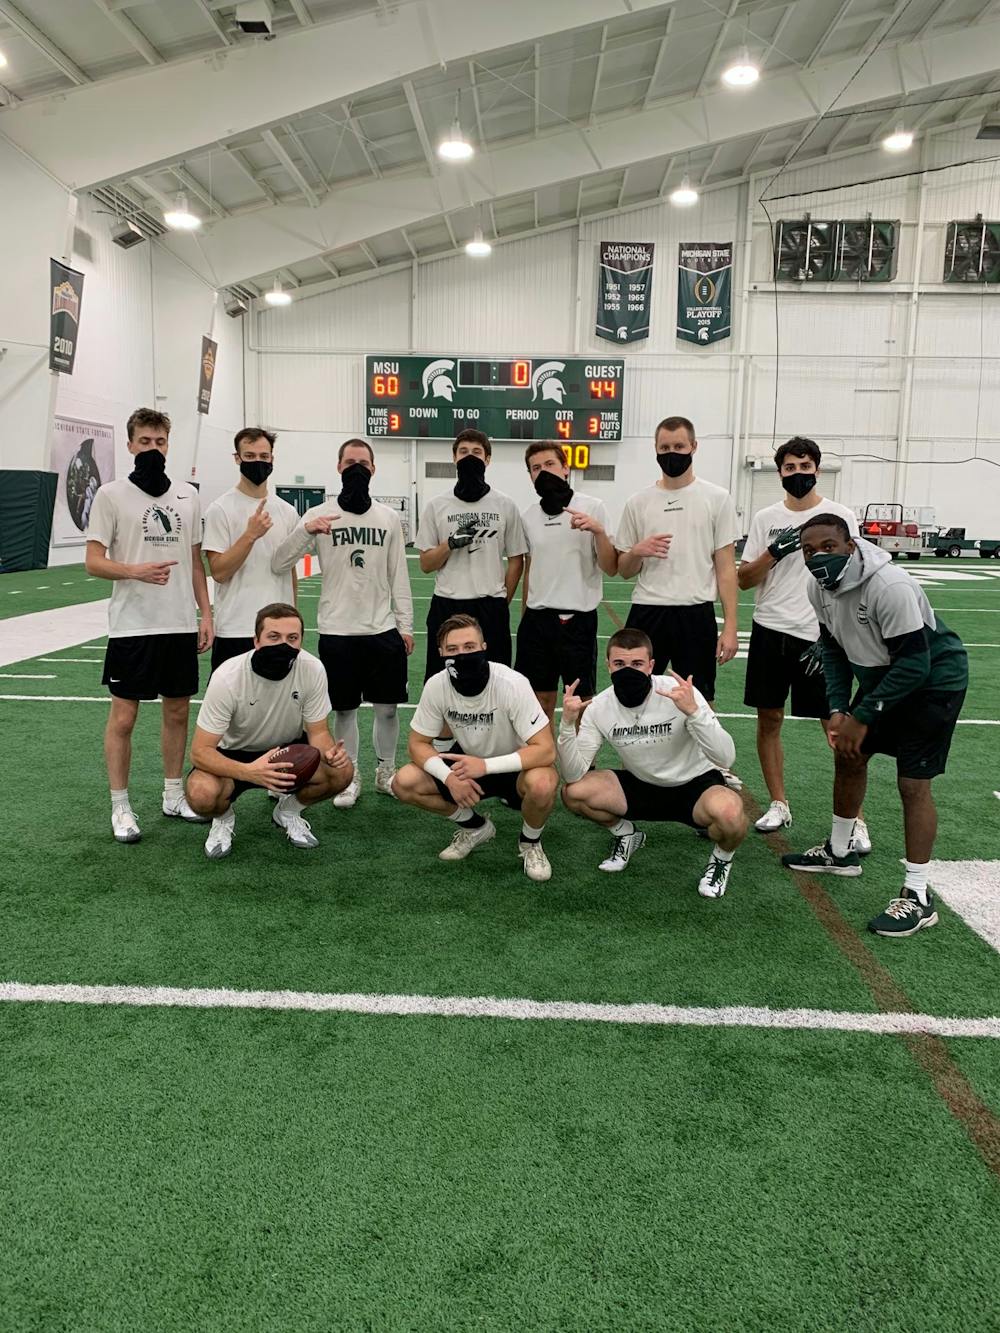 <p>Michigan State&#x27;s student equipment managers pose at the Skandalaris Football Center on the indoor practice field. </p><p>Pictured, back row (from left to right): Andrew Campbell, Michael Grodi, Dan Kalchik, Liam Ryan, Ben Connelly, Ryan Campbell, Nick Franz and Markael Butler. Front row (from left to right): Ryan Daugherty, Mason Rudy and Casey Edwards. (Photo courtesy: Ryan Daugherty, Michigan State Class of 2022)</p>